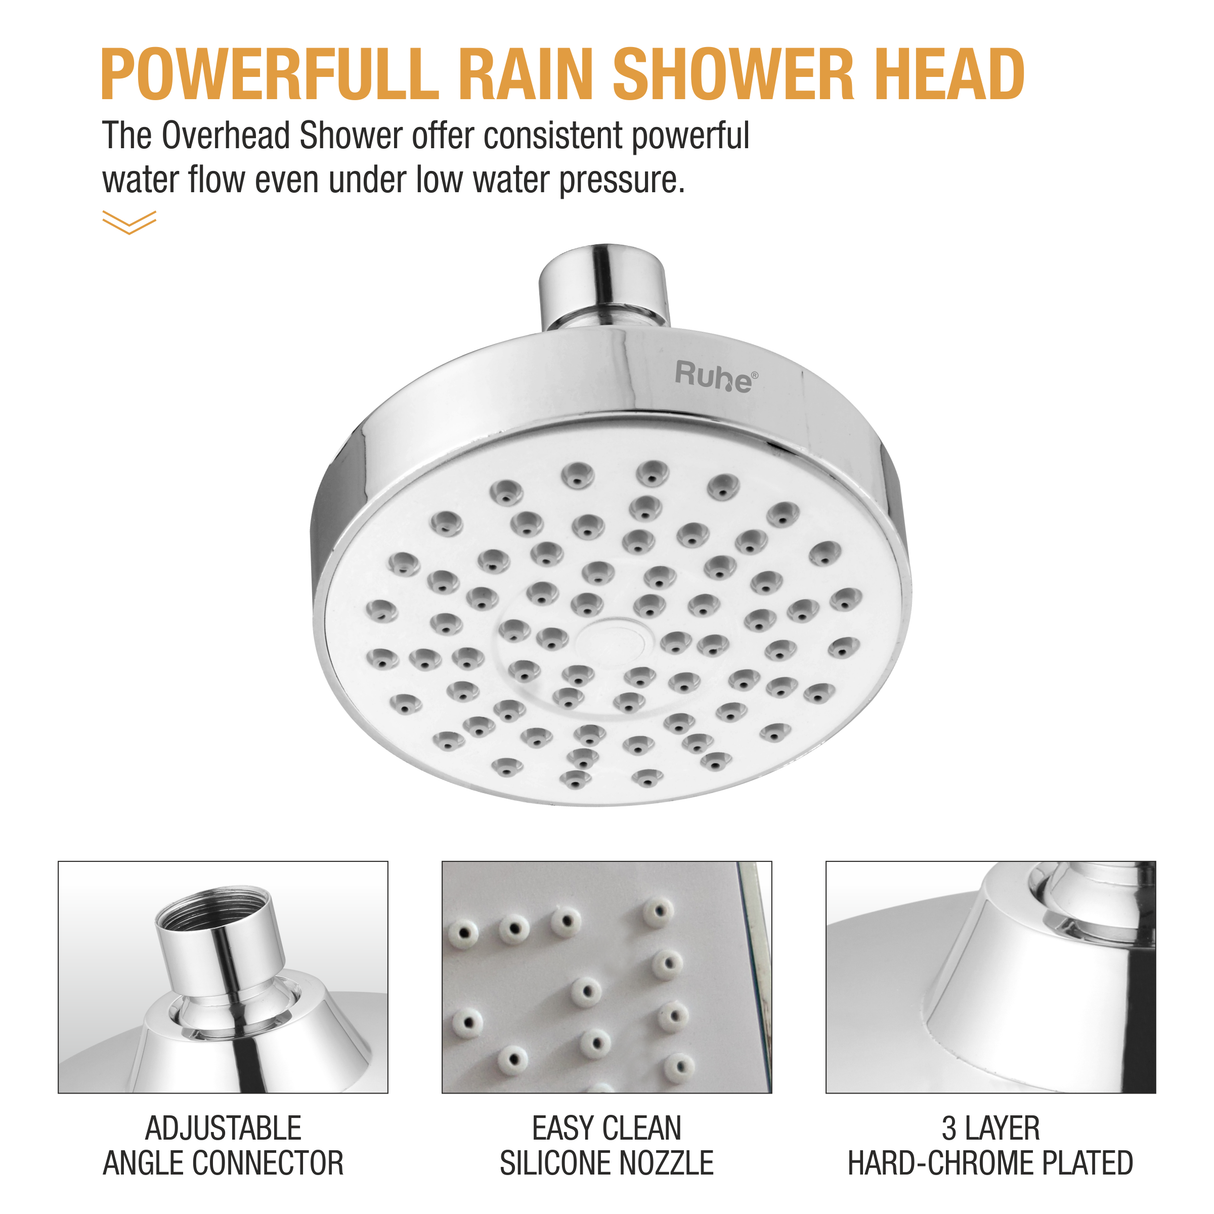 Velocity Overhead Shower (4 Inches) features